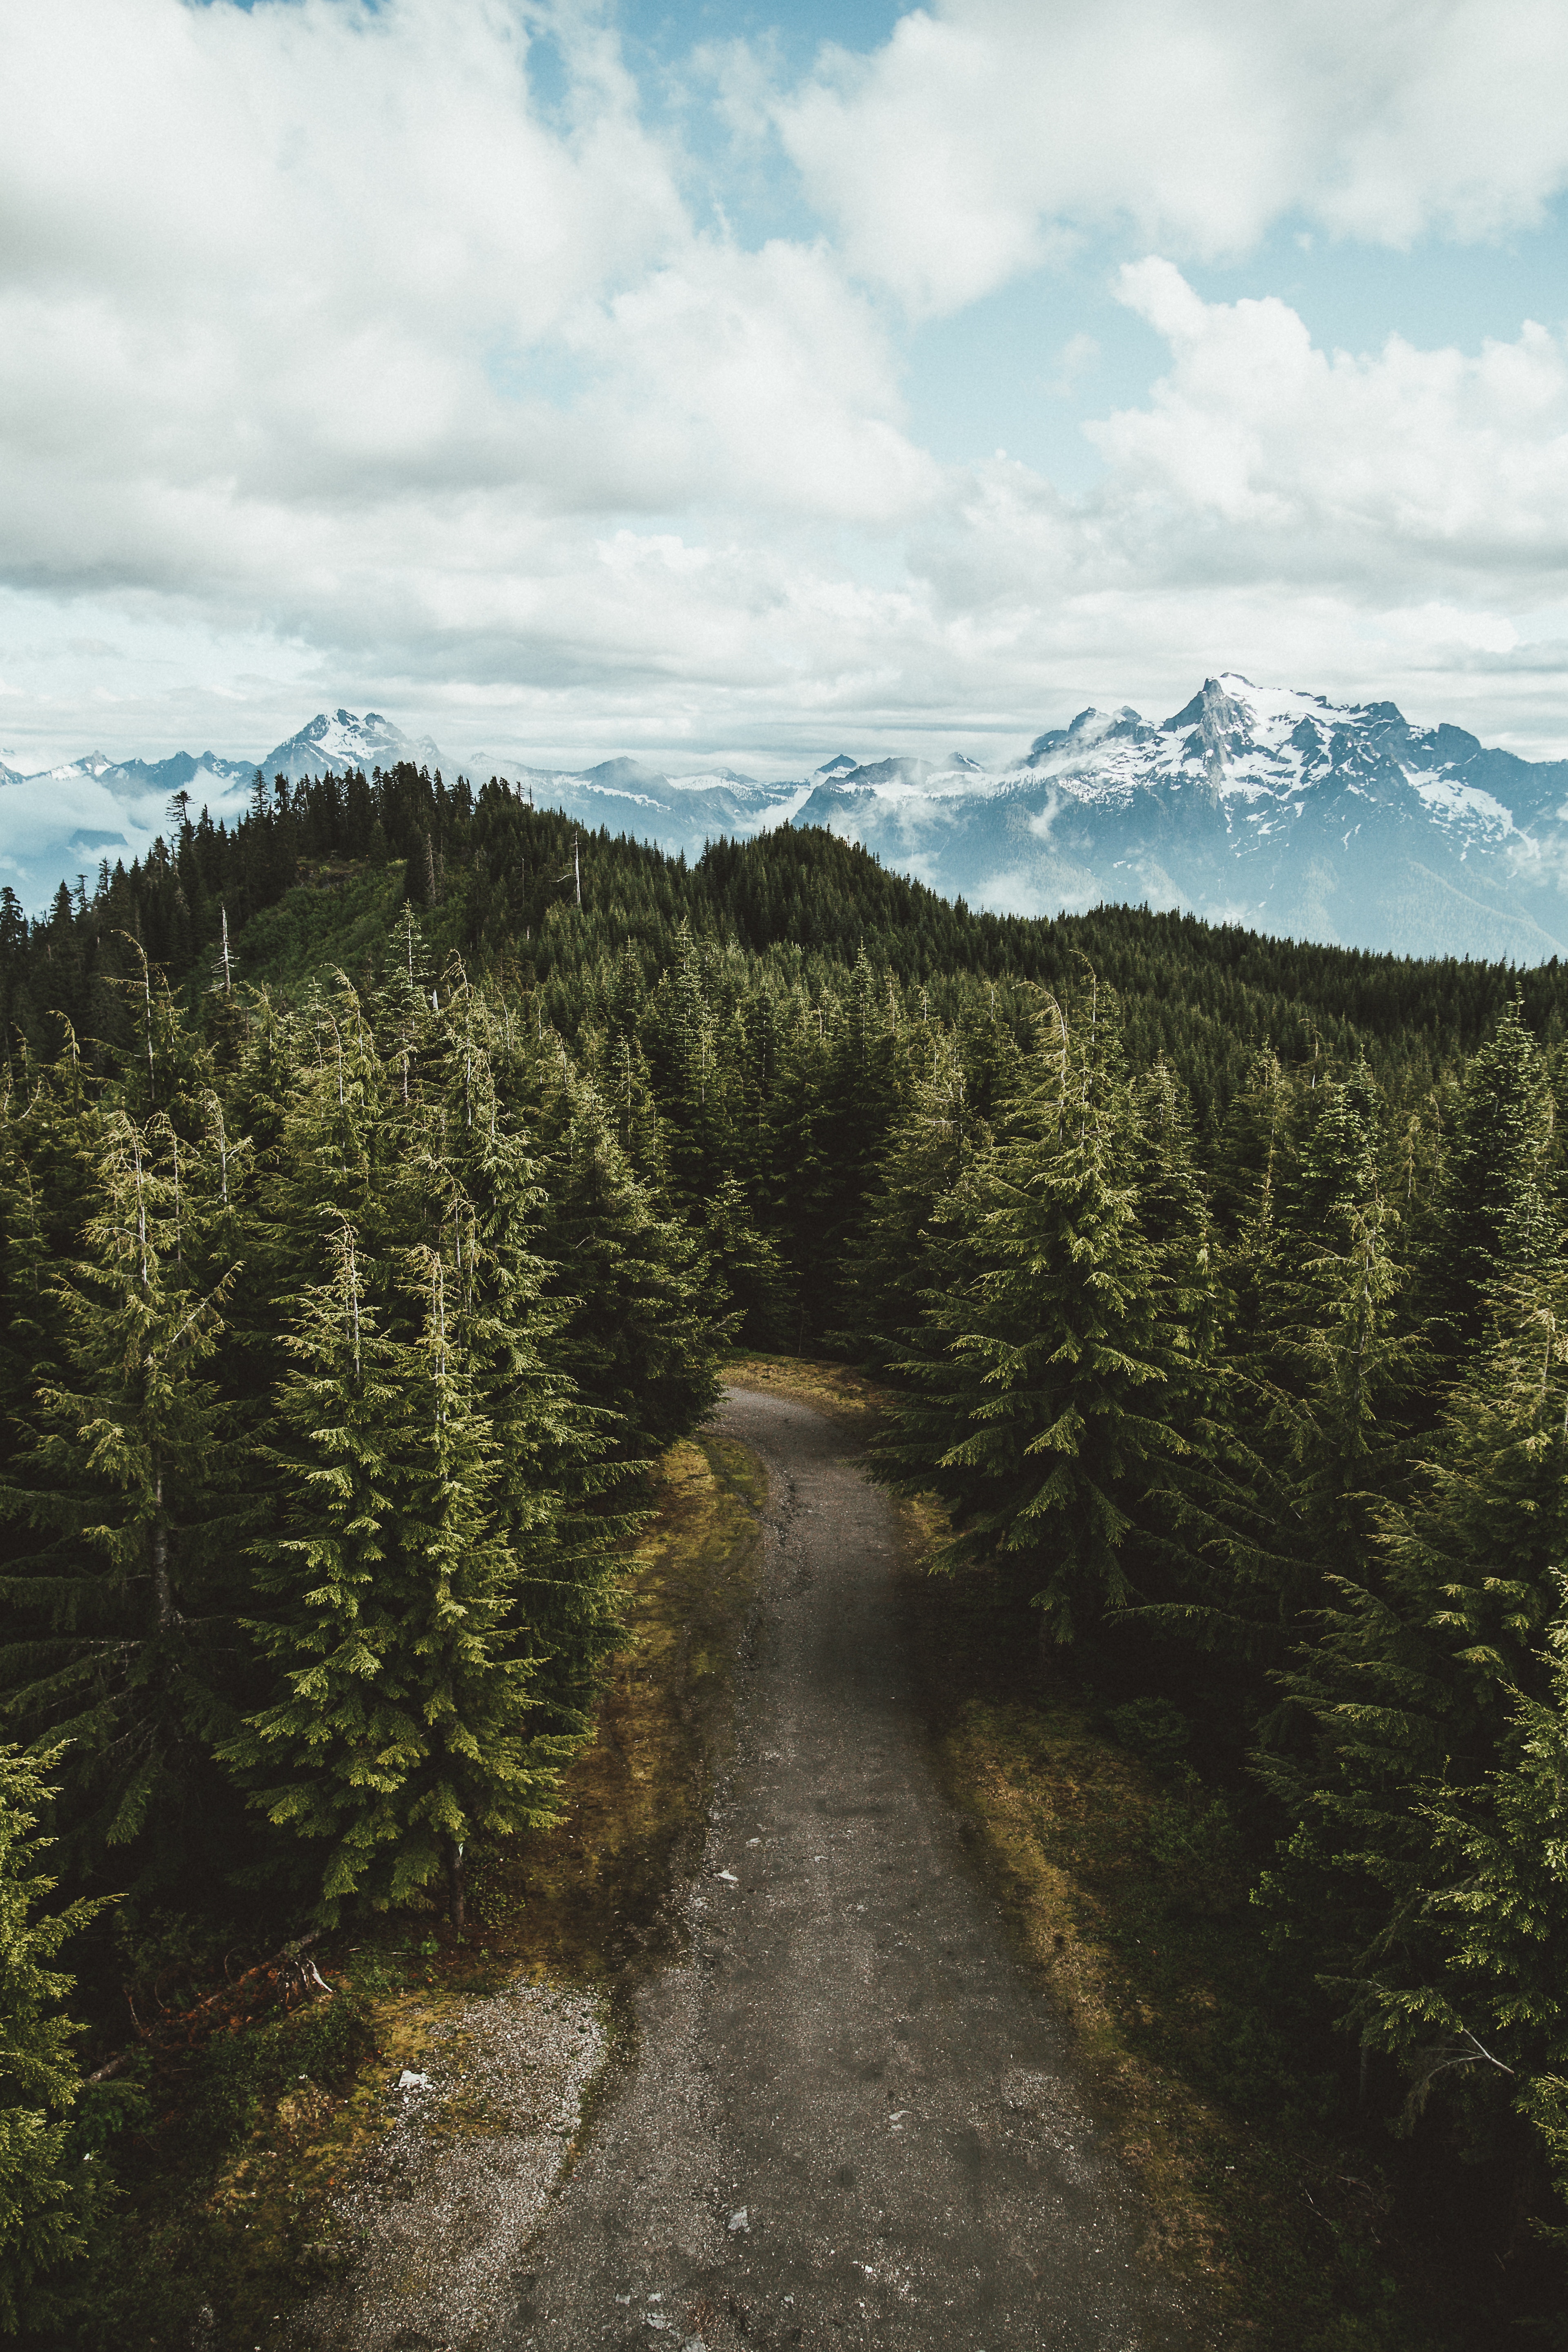 usa, united states, landscape, nature, trees, sky, mountains, view from above, road, darrington